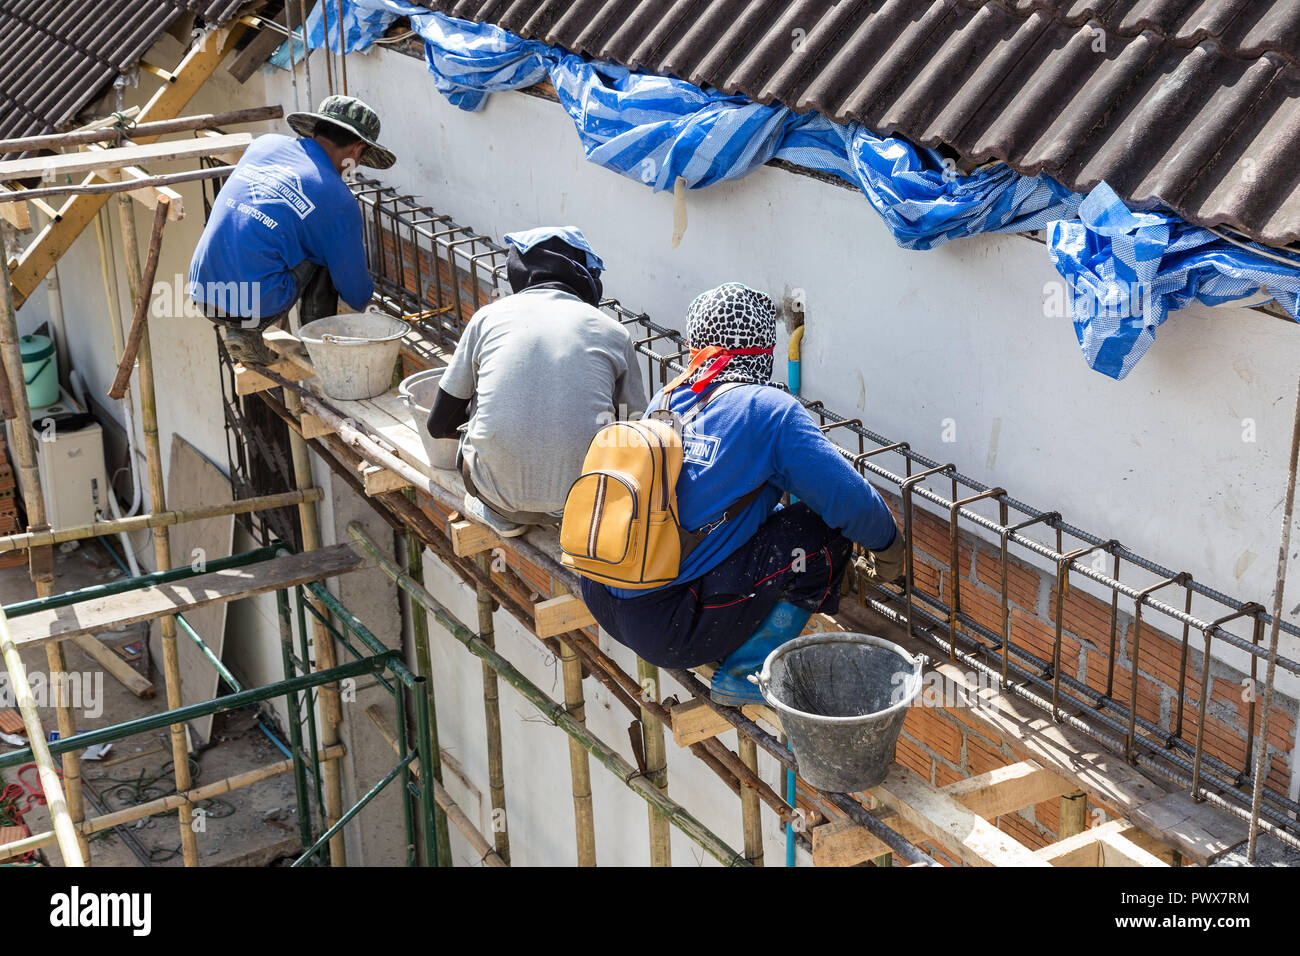 CHIANG MAI, THAILAND - 13 August 2018 - Male and female construction workers prepare rebar steels for concrete beams and colunms and a house construct Stock Photo